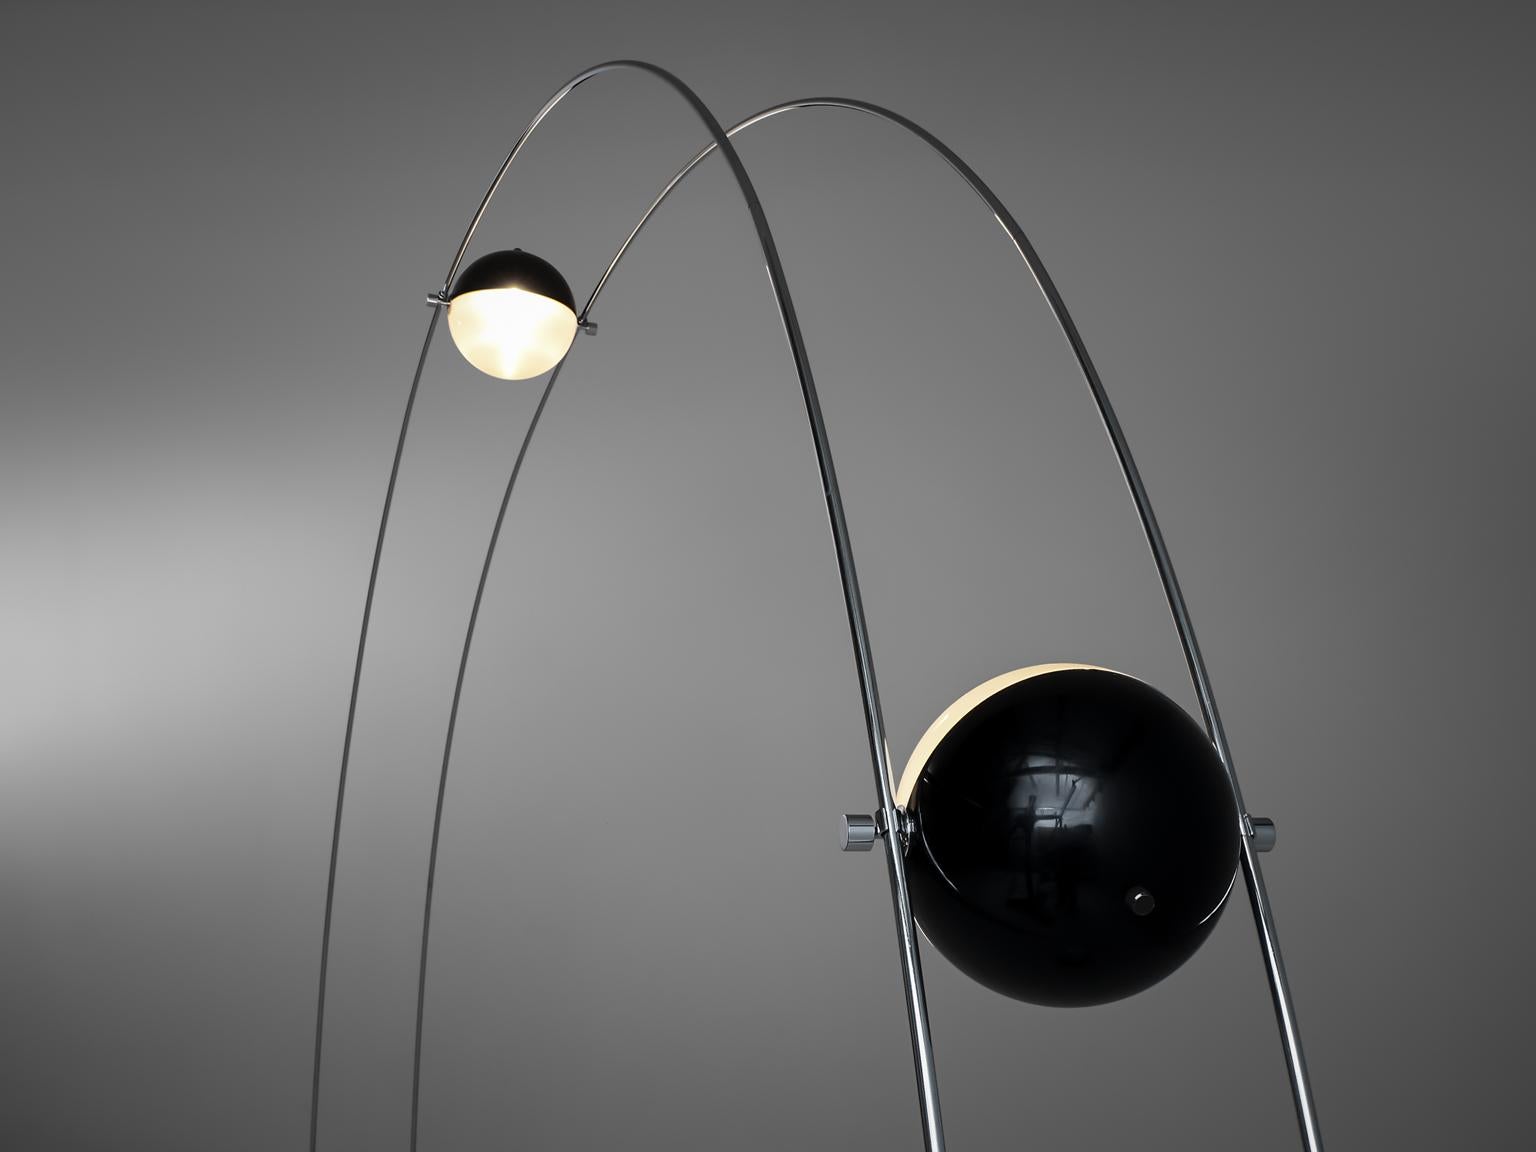 Arditi group for Sormani, floor lamp, in marble, plastic and metal, Italy, 1970s.

Very large 'Ponte' floor lamp designed by Arditi group for Sormani. Lighting sculpture equipped with two adjustable lights connected on two steel tracks. This large